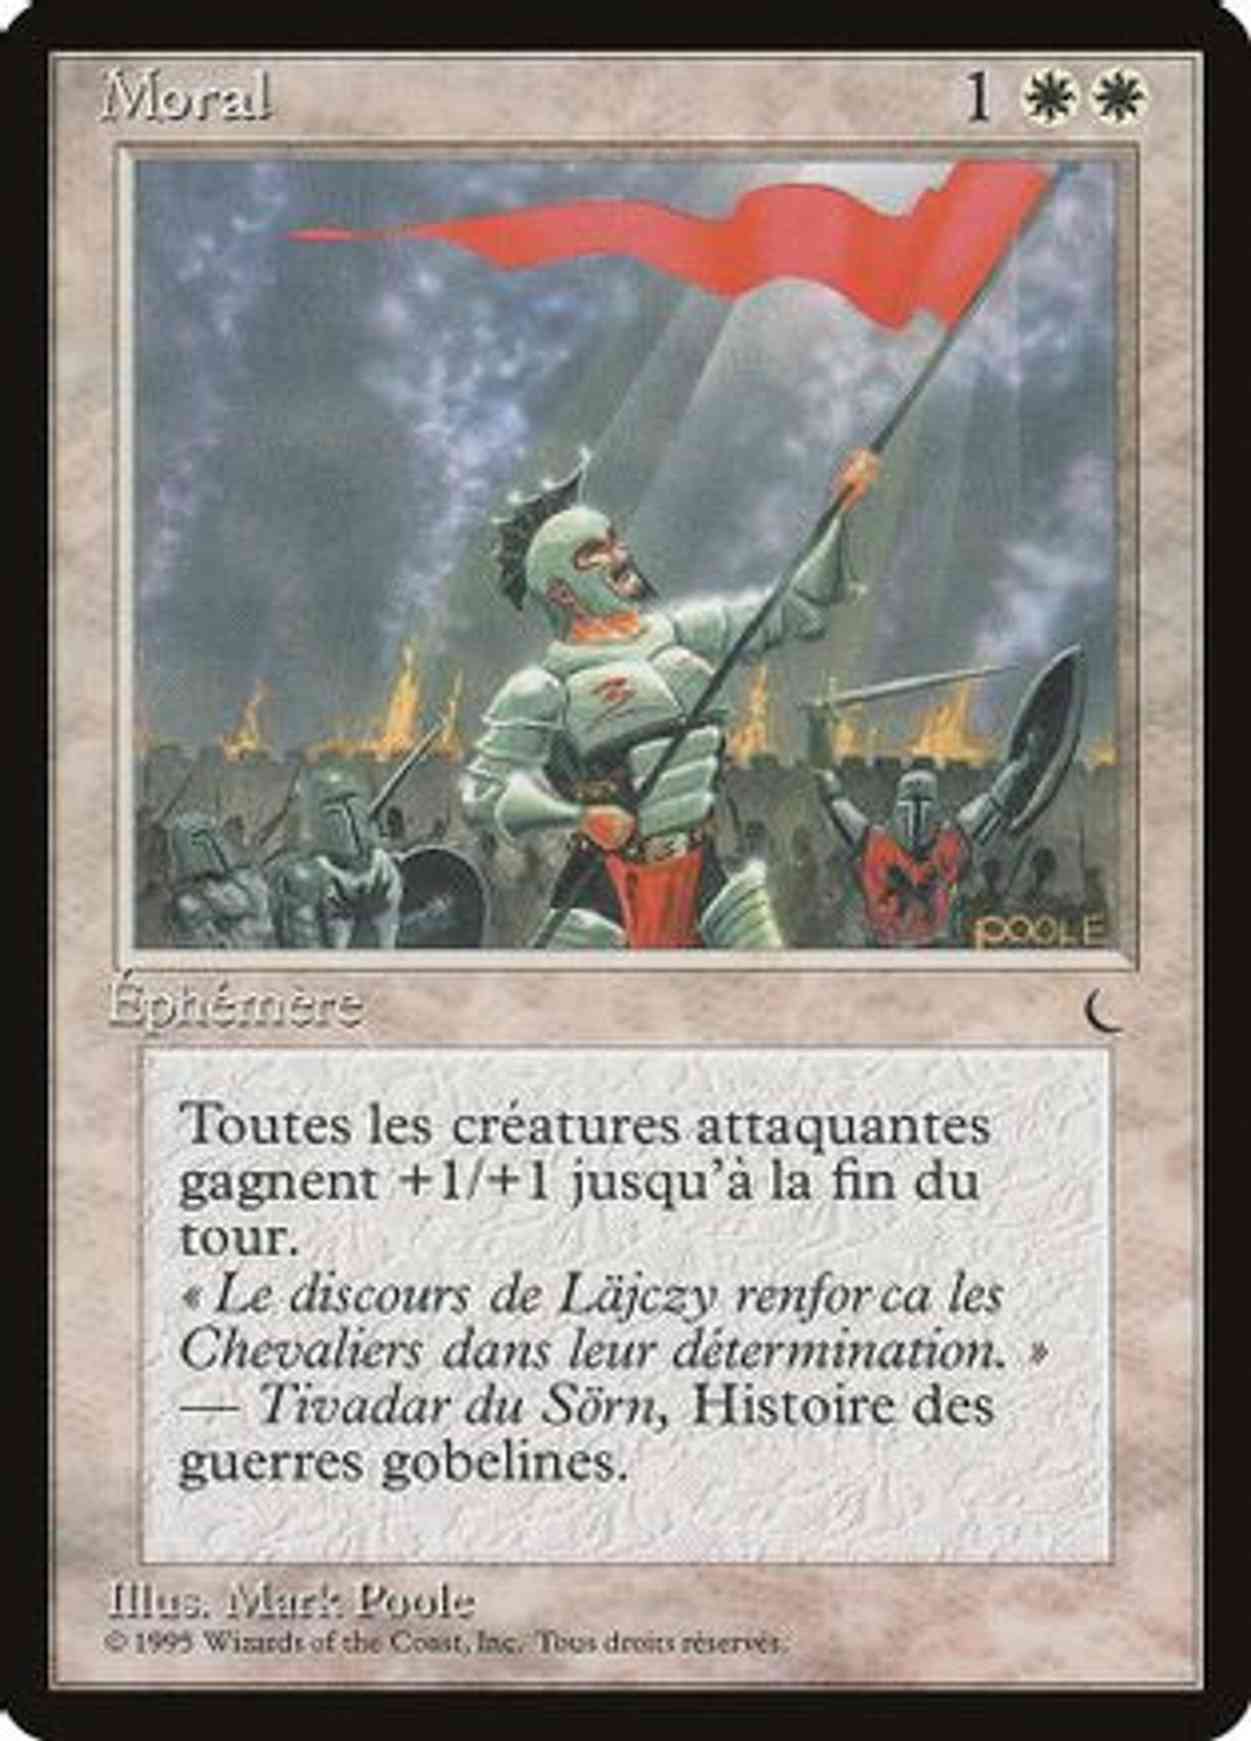 Morale (French) - "Moral" magic card front